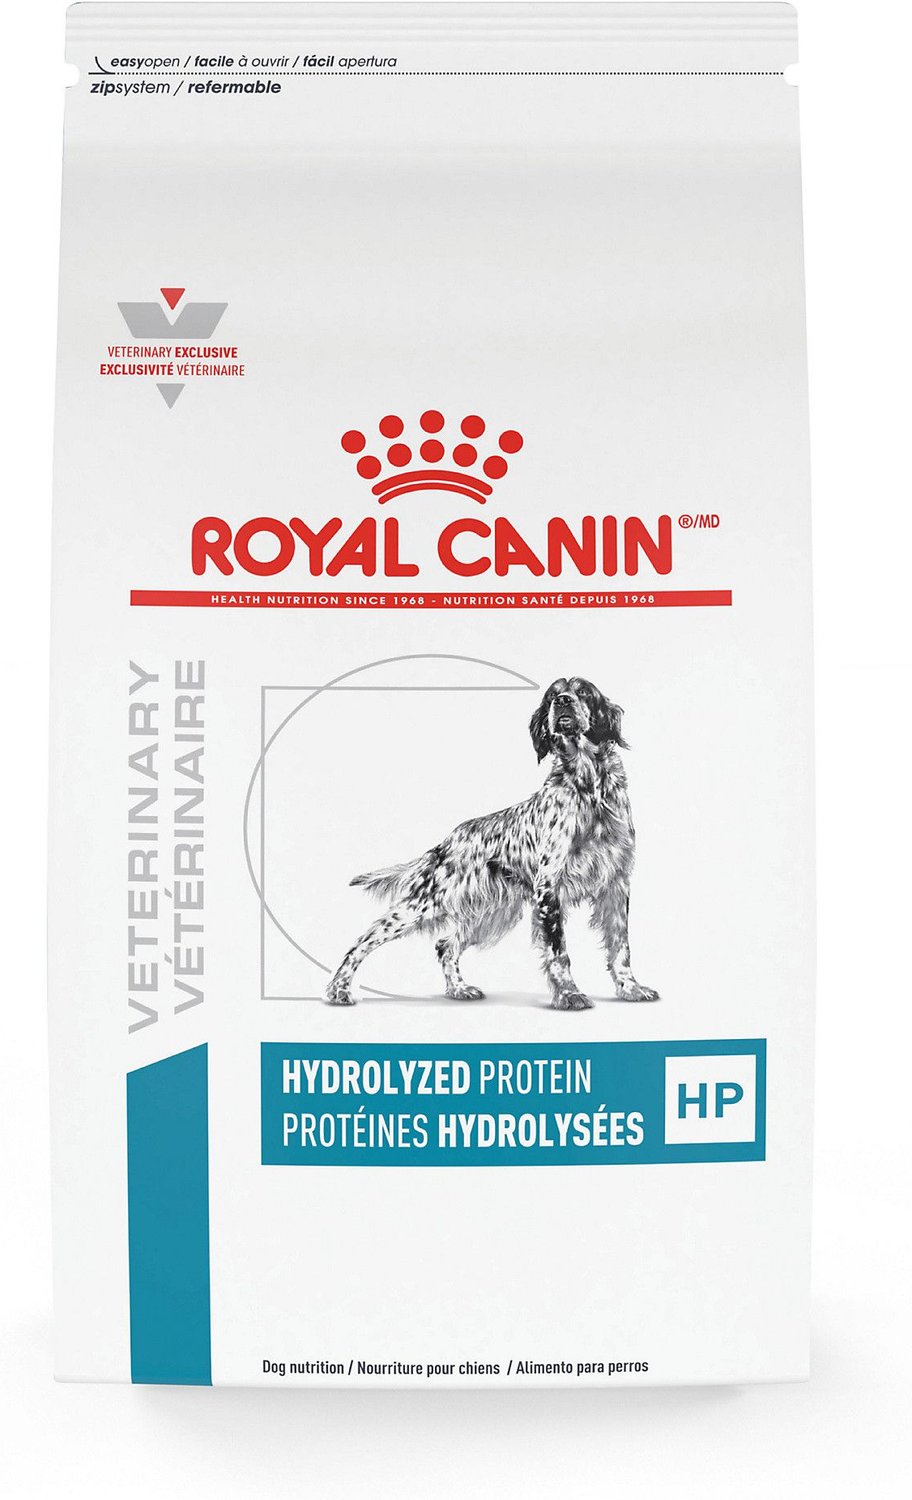 munt Silicium Kauwgom ROYAL CANIN VETERINARY DIET Hydrolyzed Protein HP Dry Dog Food, 7.7-lb bag  - Chewy.com